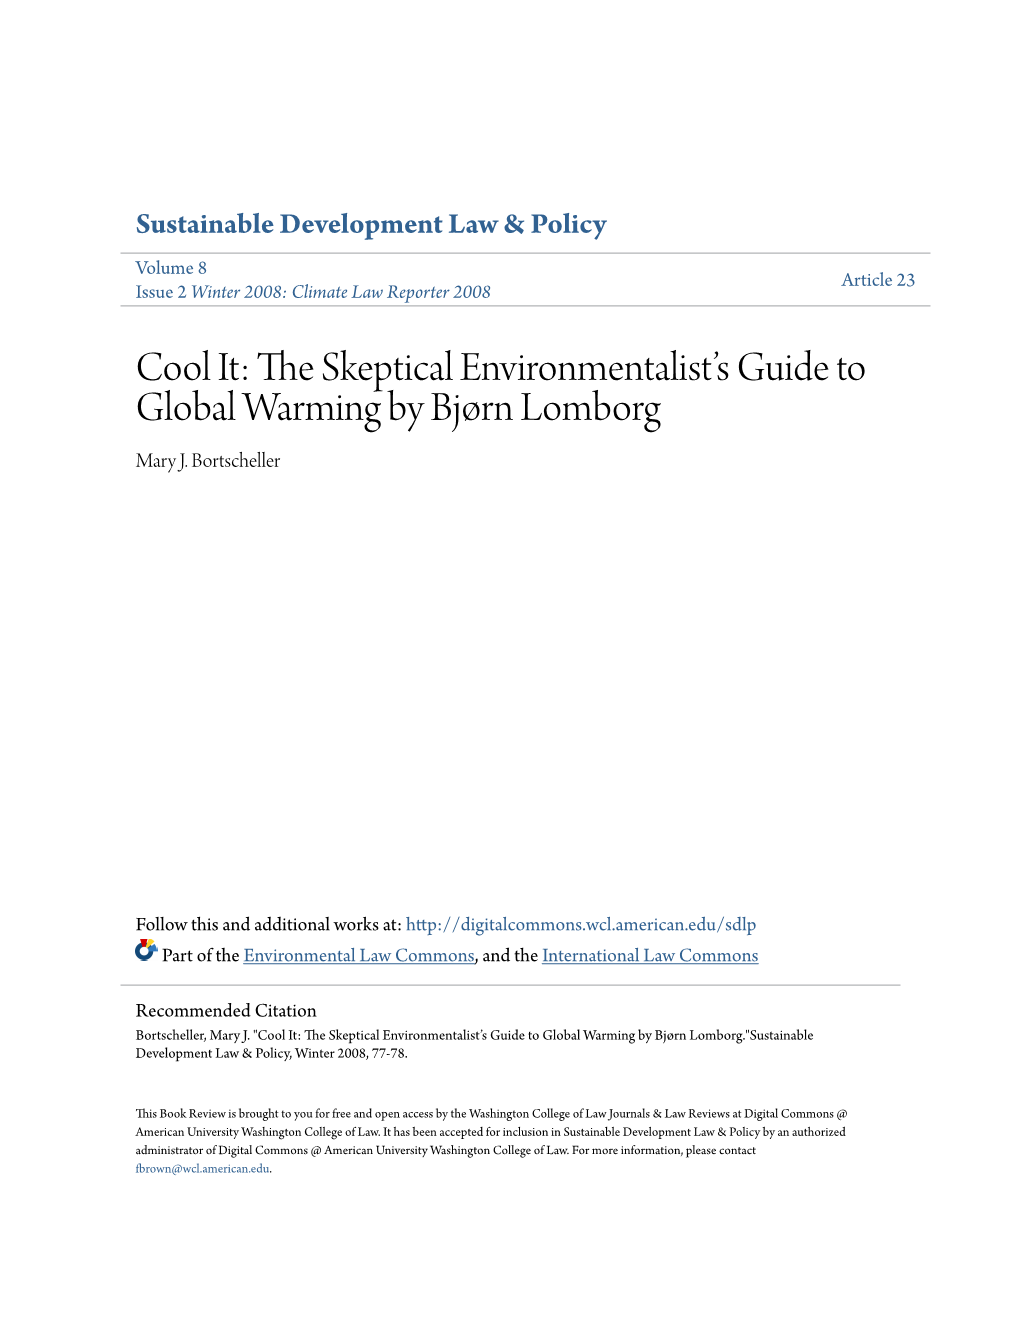 Cool It: the Skeptical Environmentalist's Guide to Global